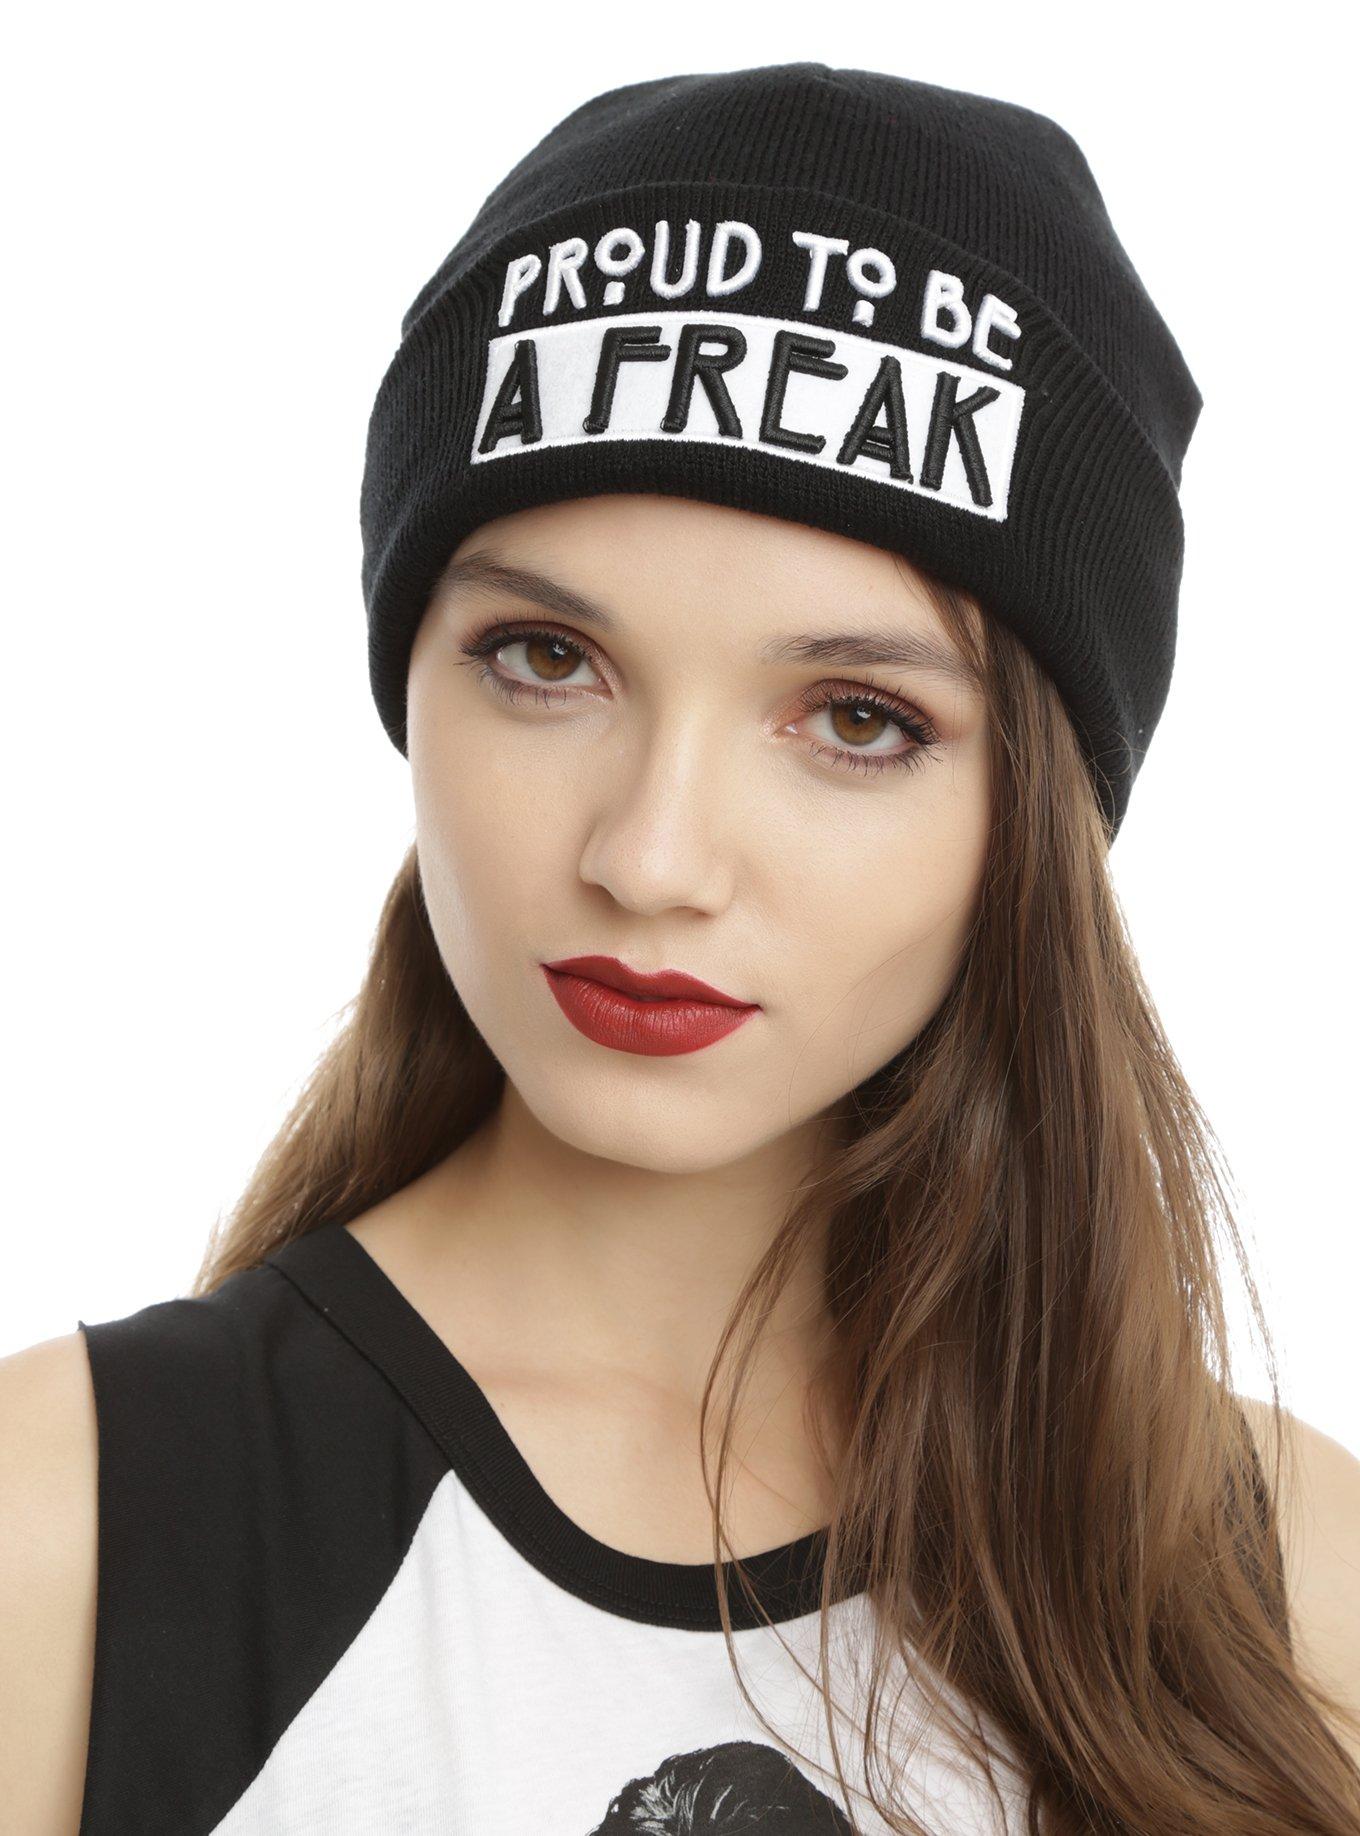 American Horror Story Proud To Be A Freak Watchman Beanie | Hot Topic